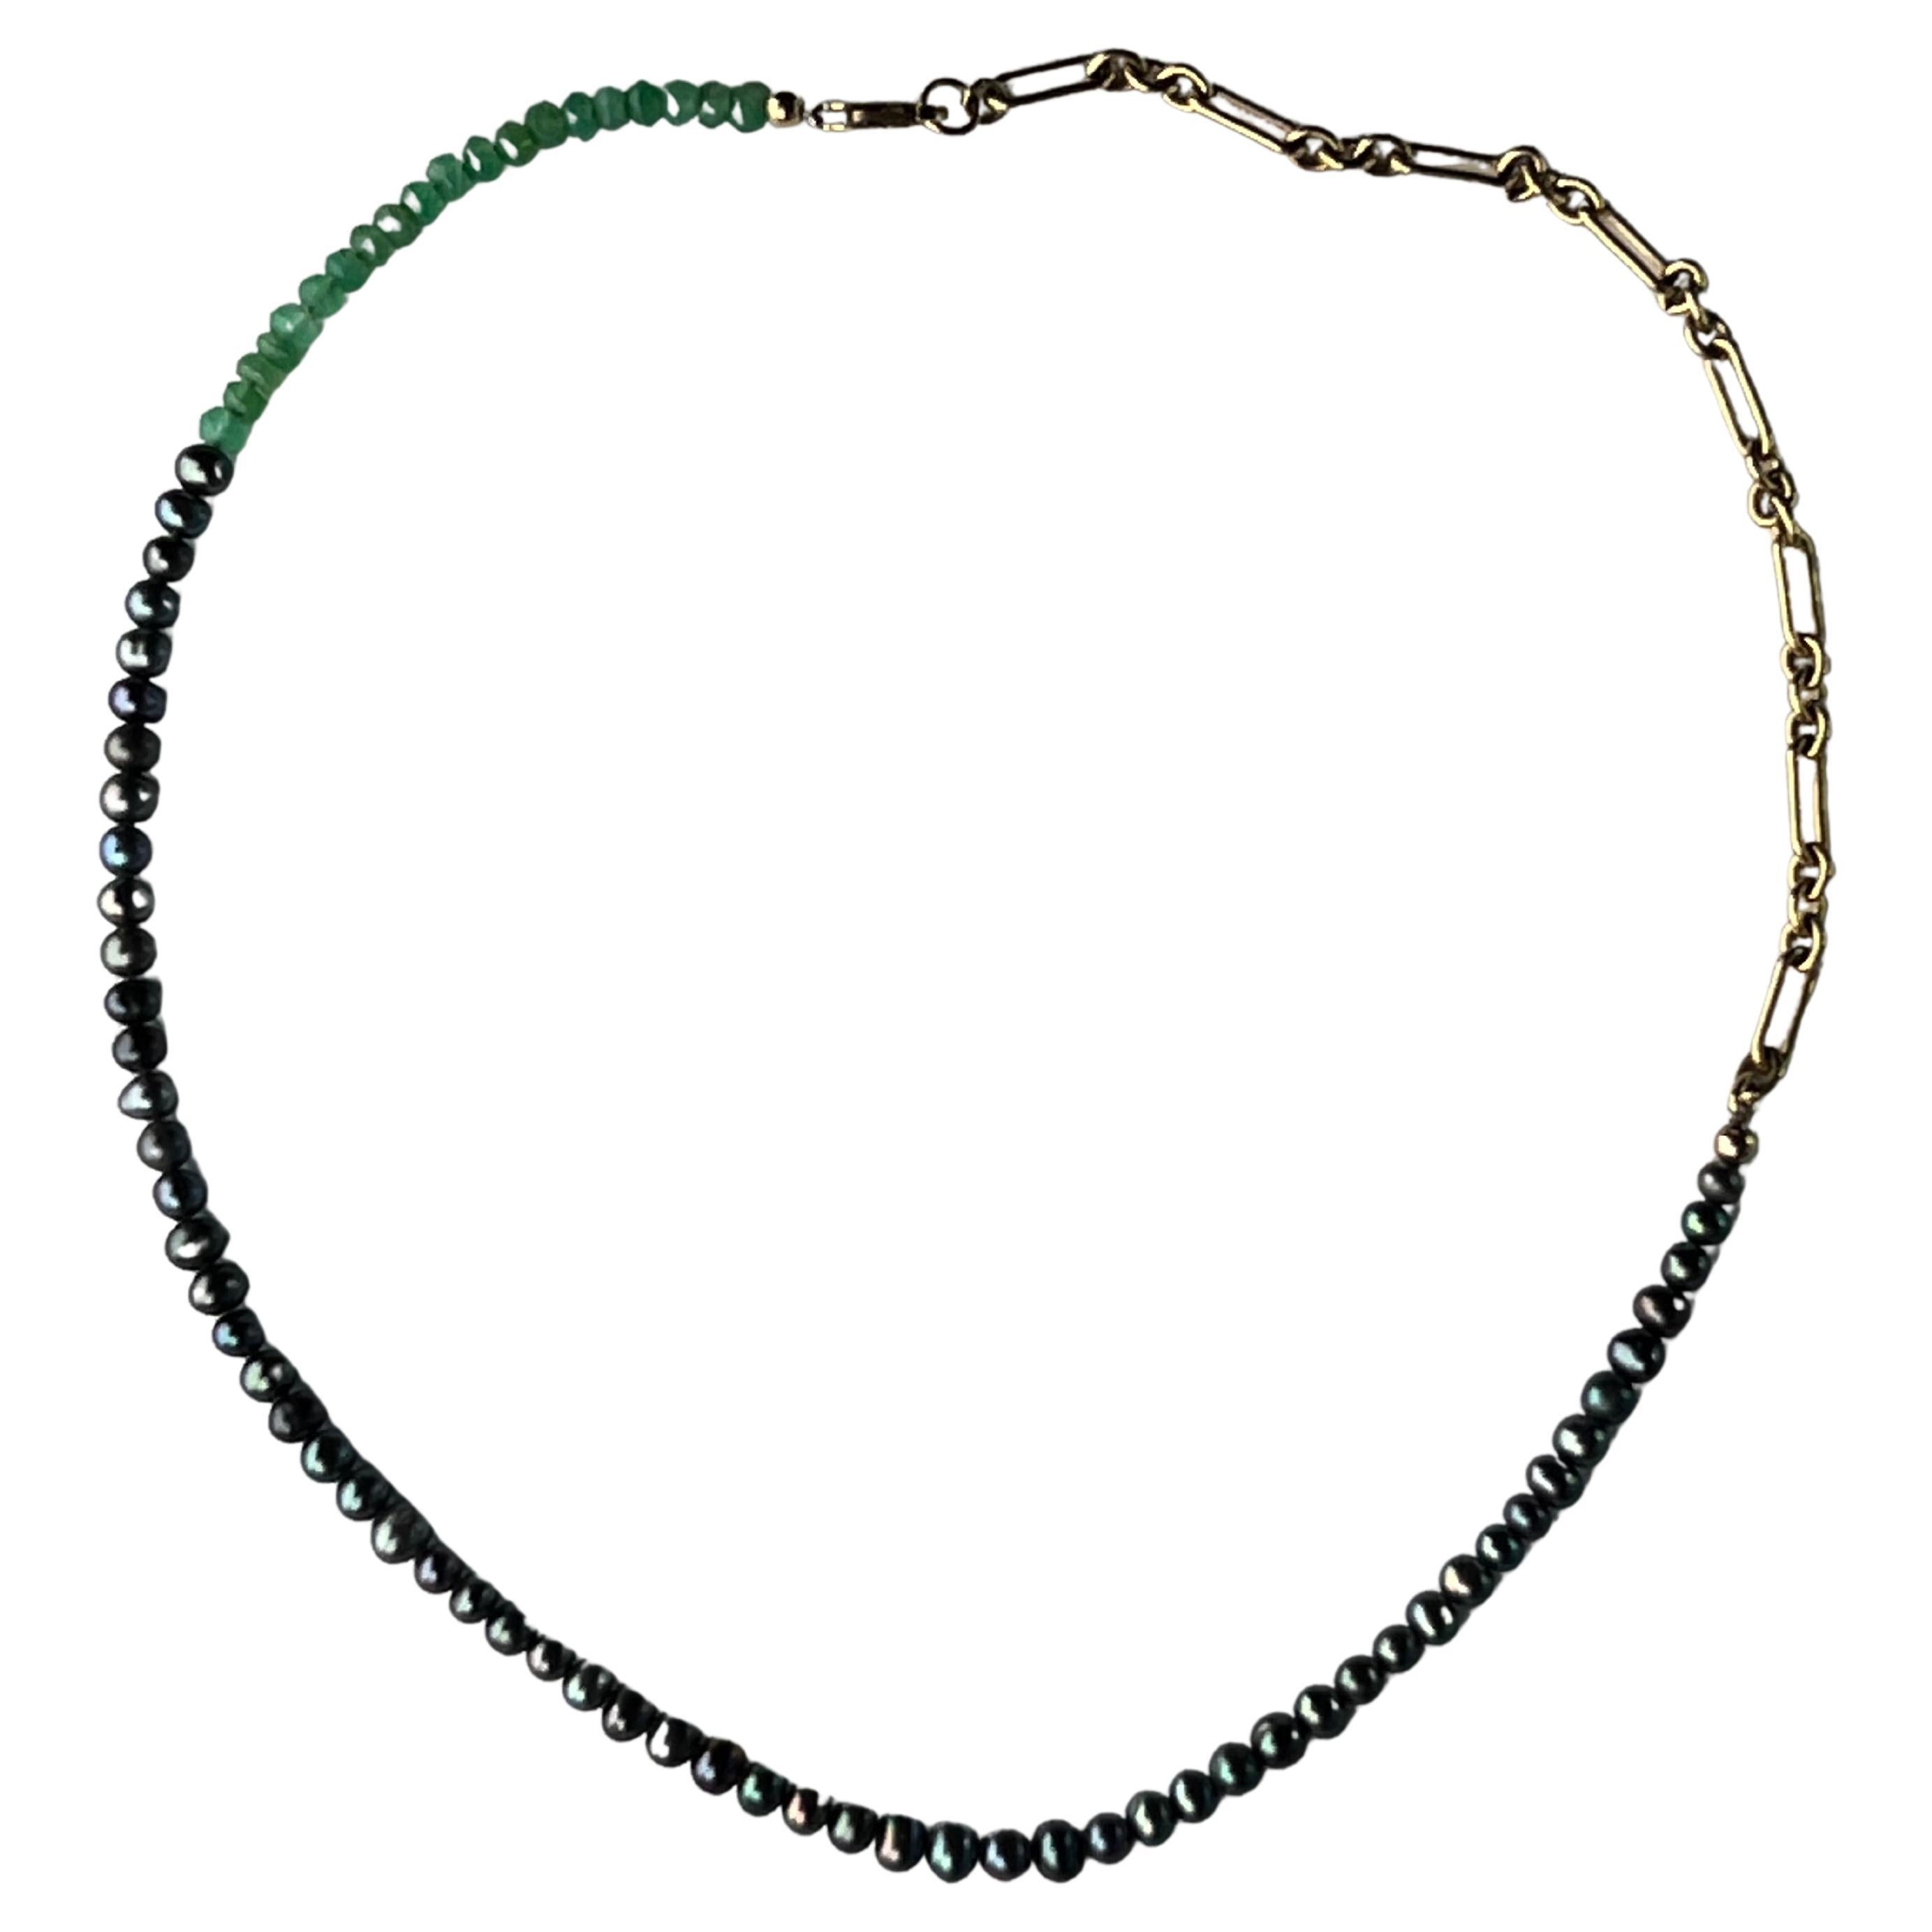 Black Pearl Chrysoprase Choker Necklace Chain J Dauphin For Sale